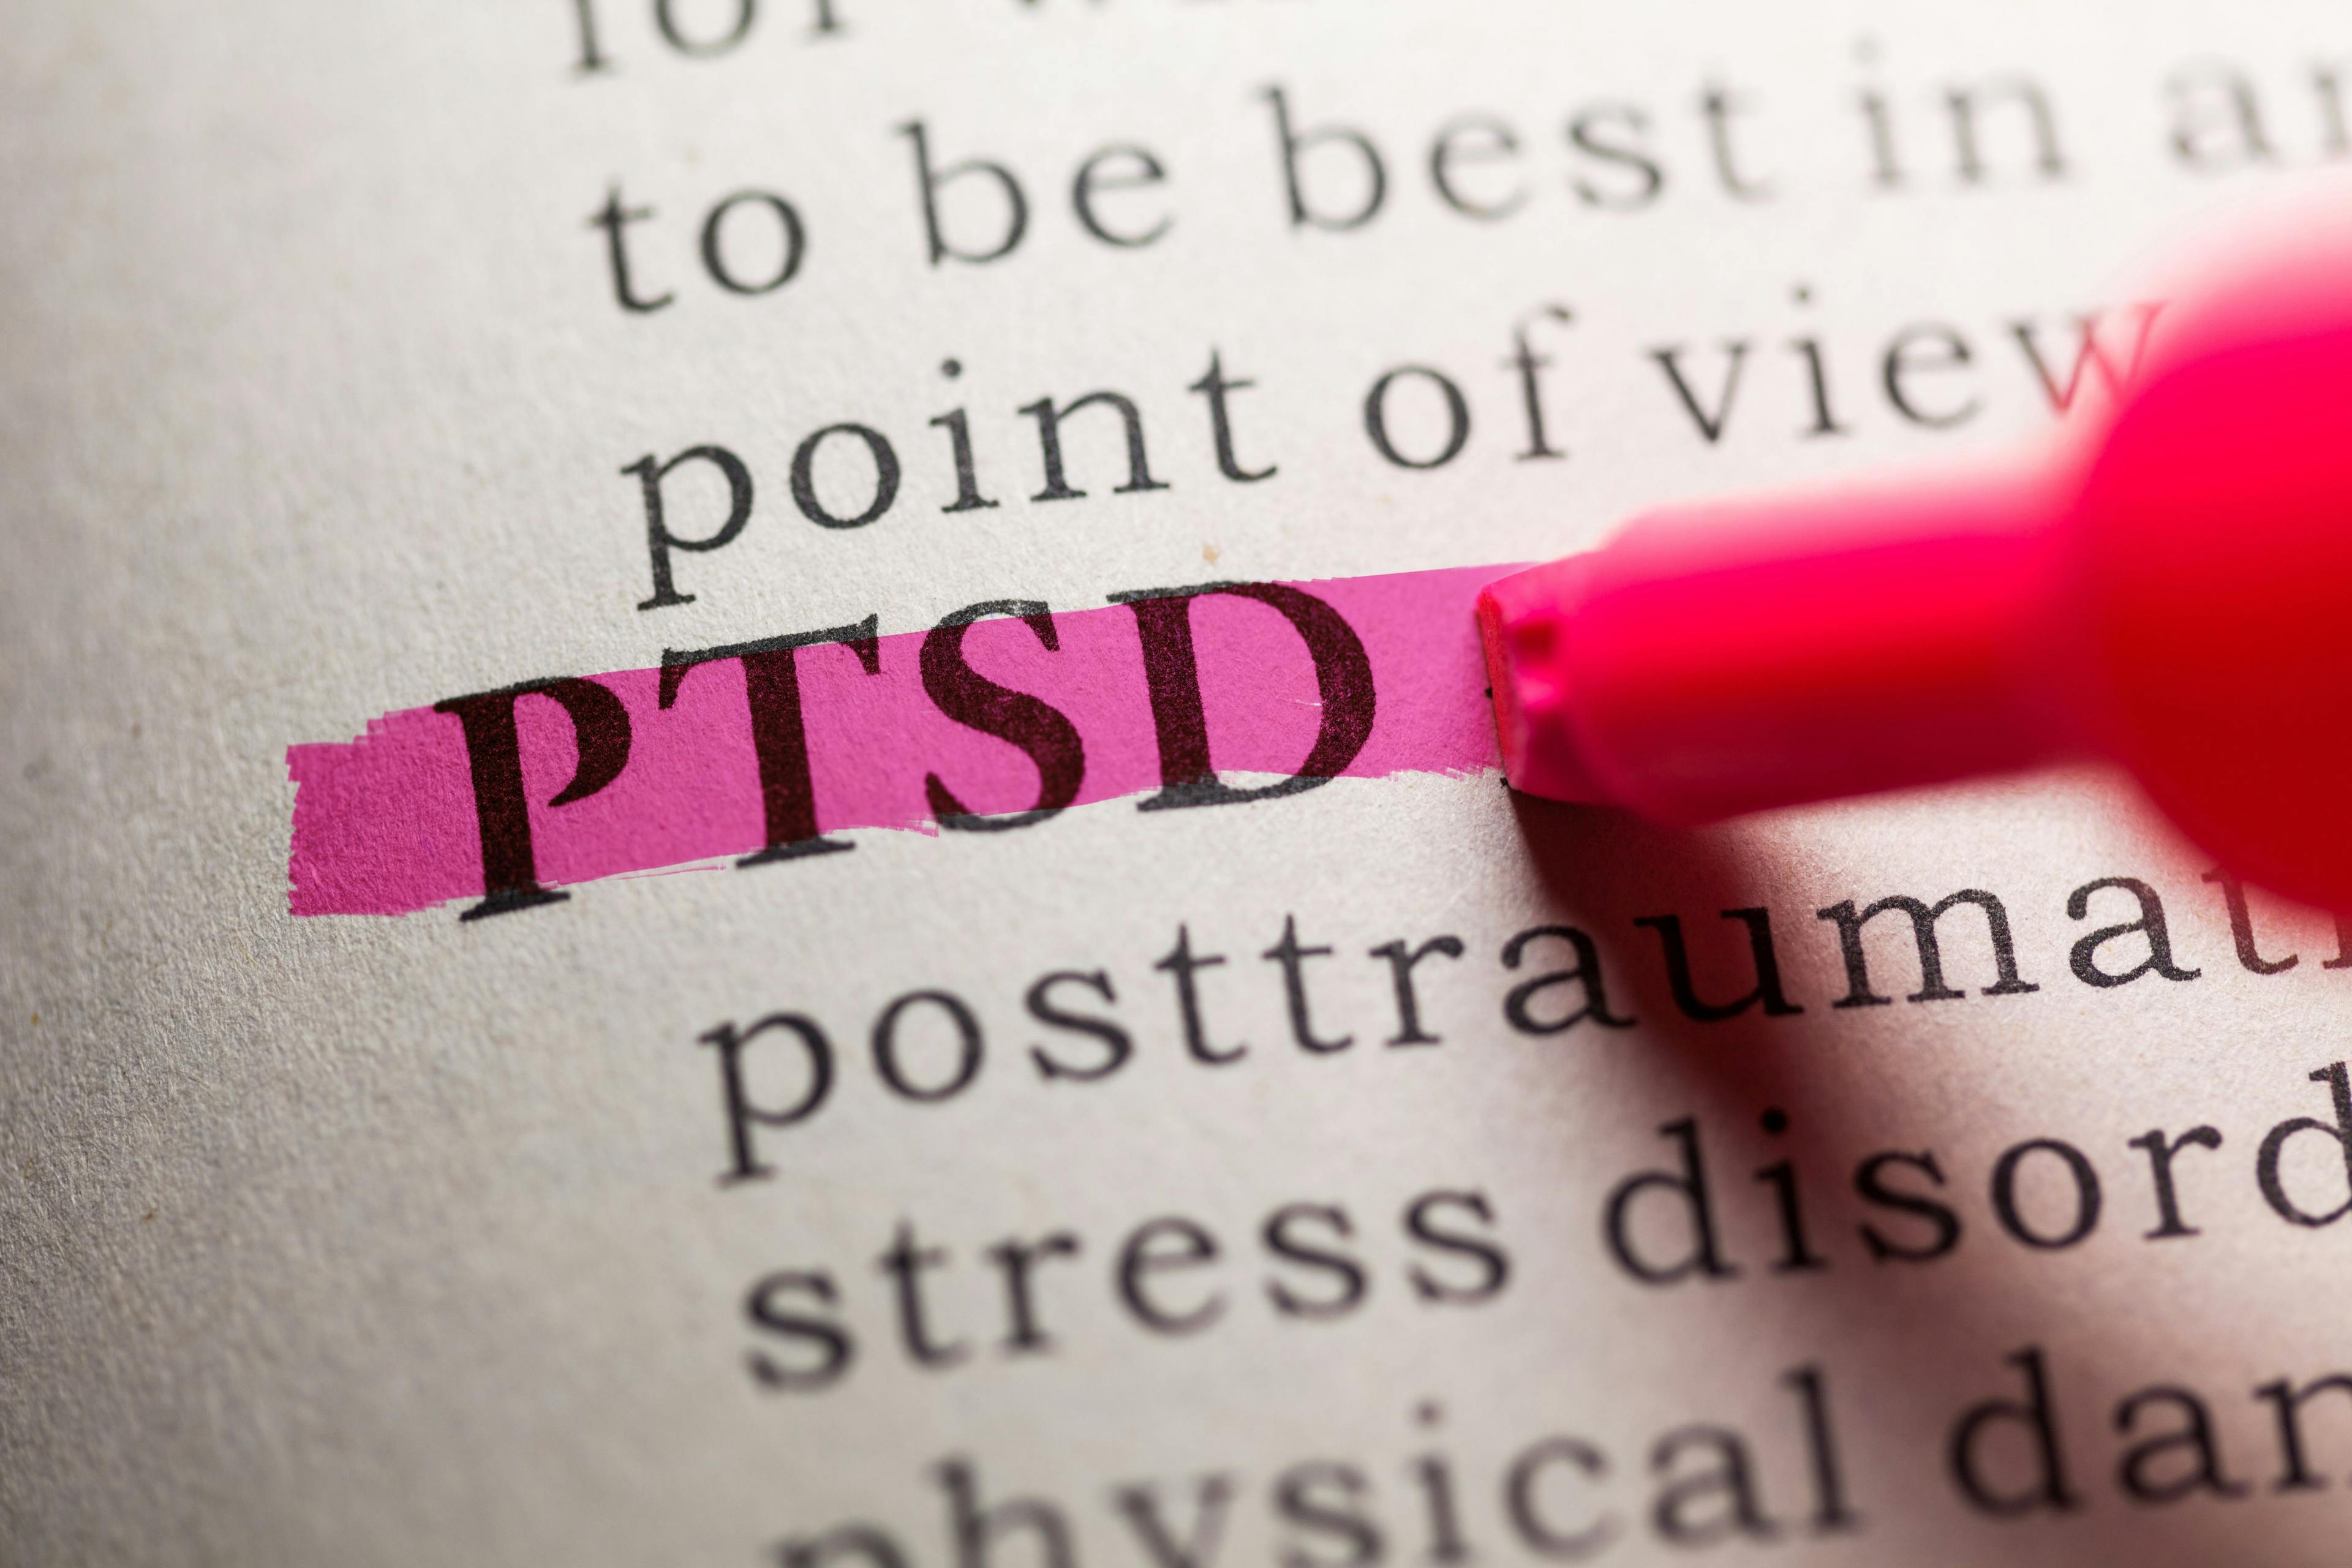 Here are 5 processes to provide focus and empowerment for patients with PTSD.